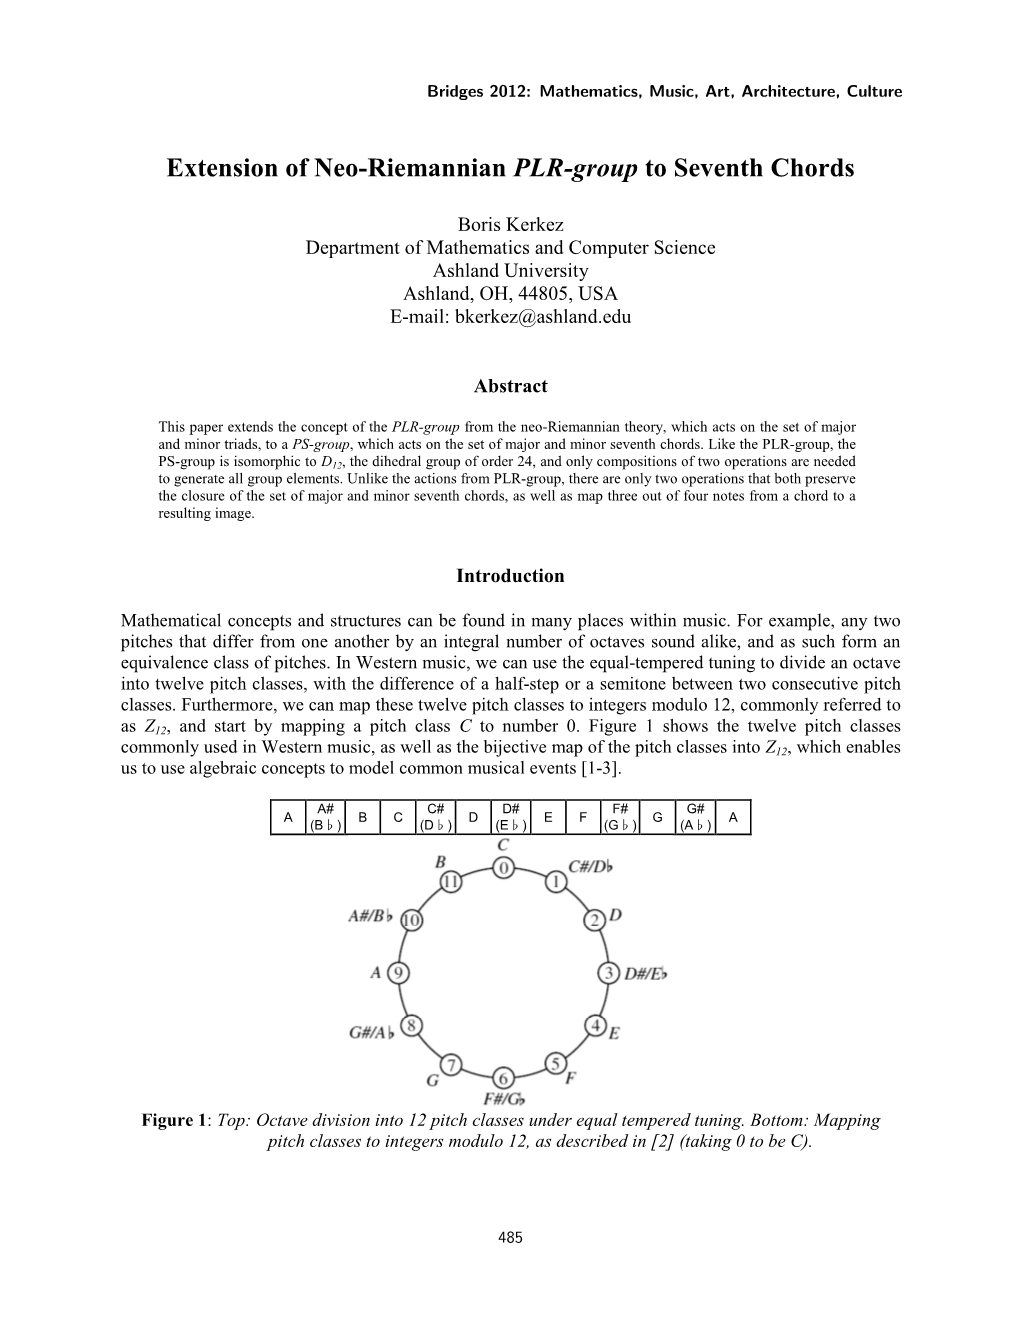 Extension of Neo-Riemannian PLR-Group to Seventh Chords